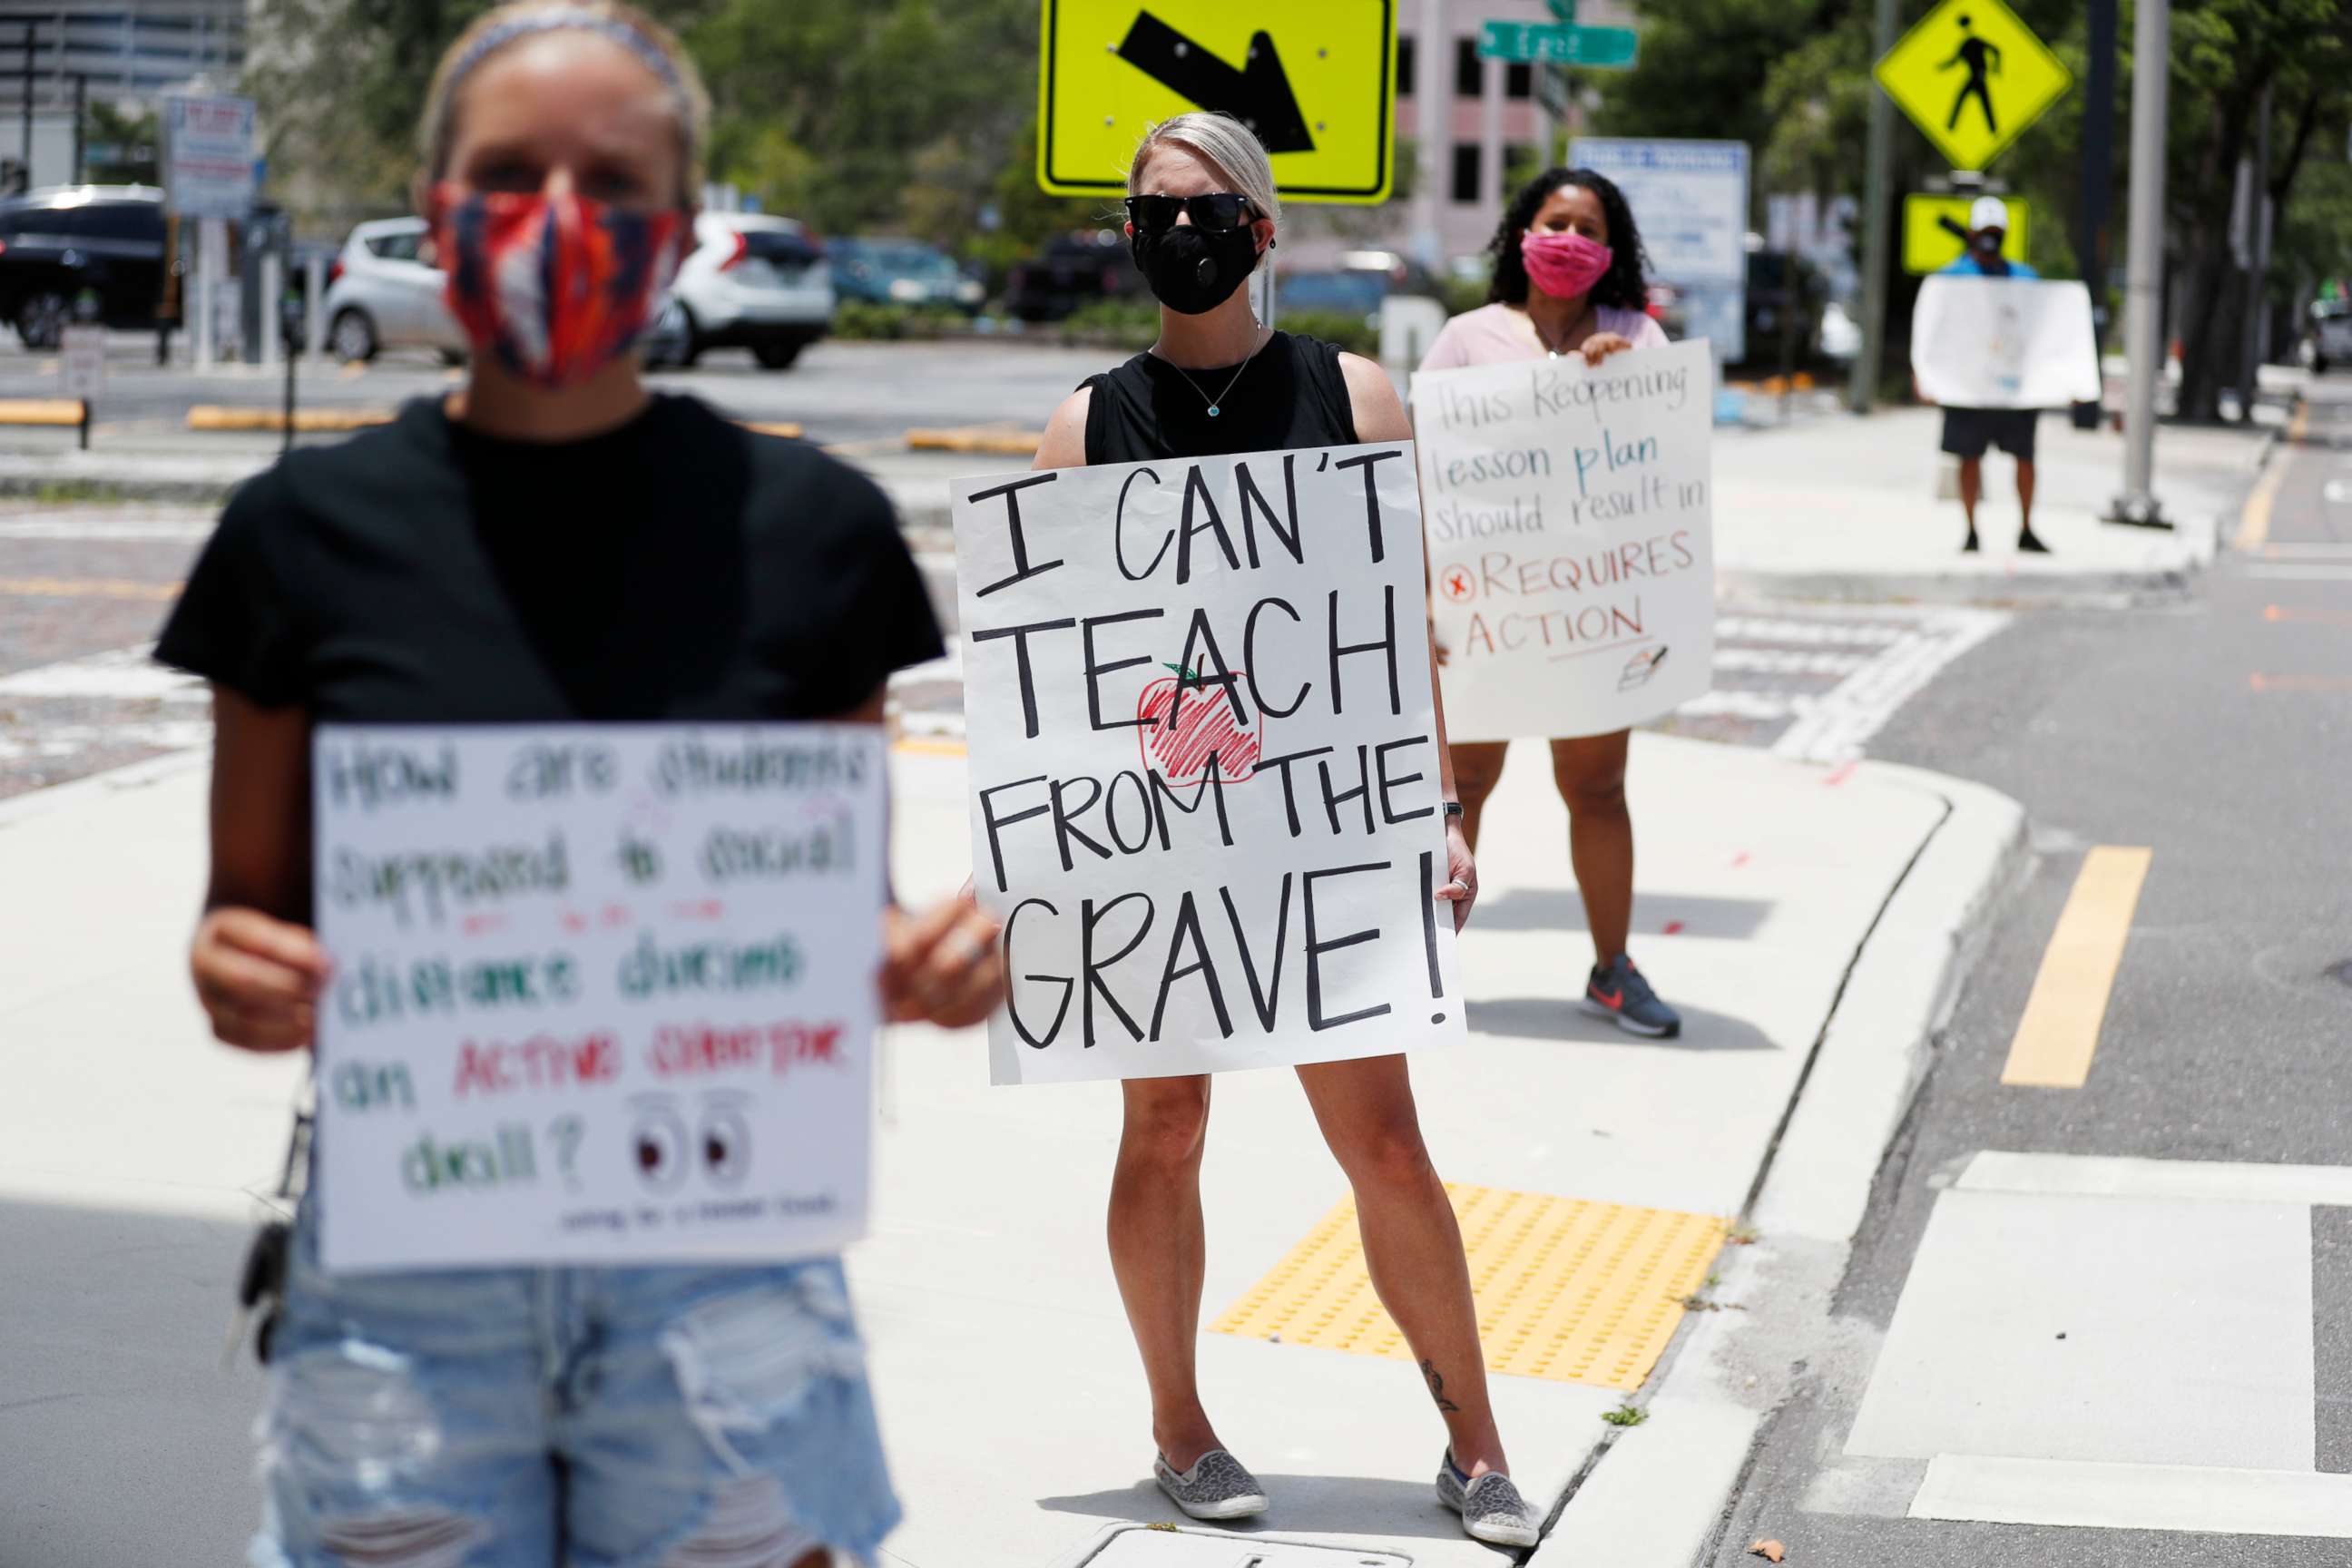 PHOTO: Teachers stand in protest in front of the Hillsborough County Schools District Office on July 16, 2020 in Tampa, Florida.